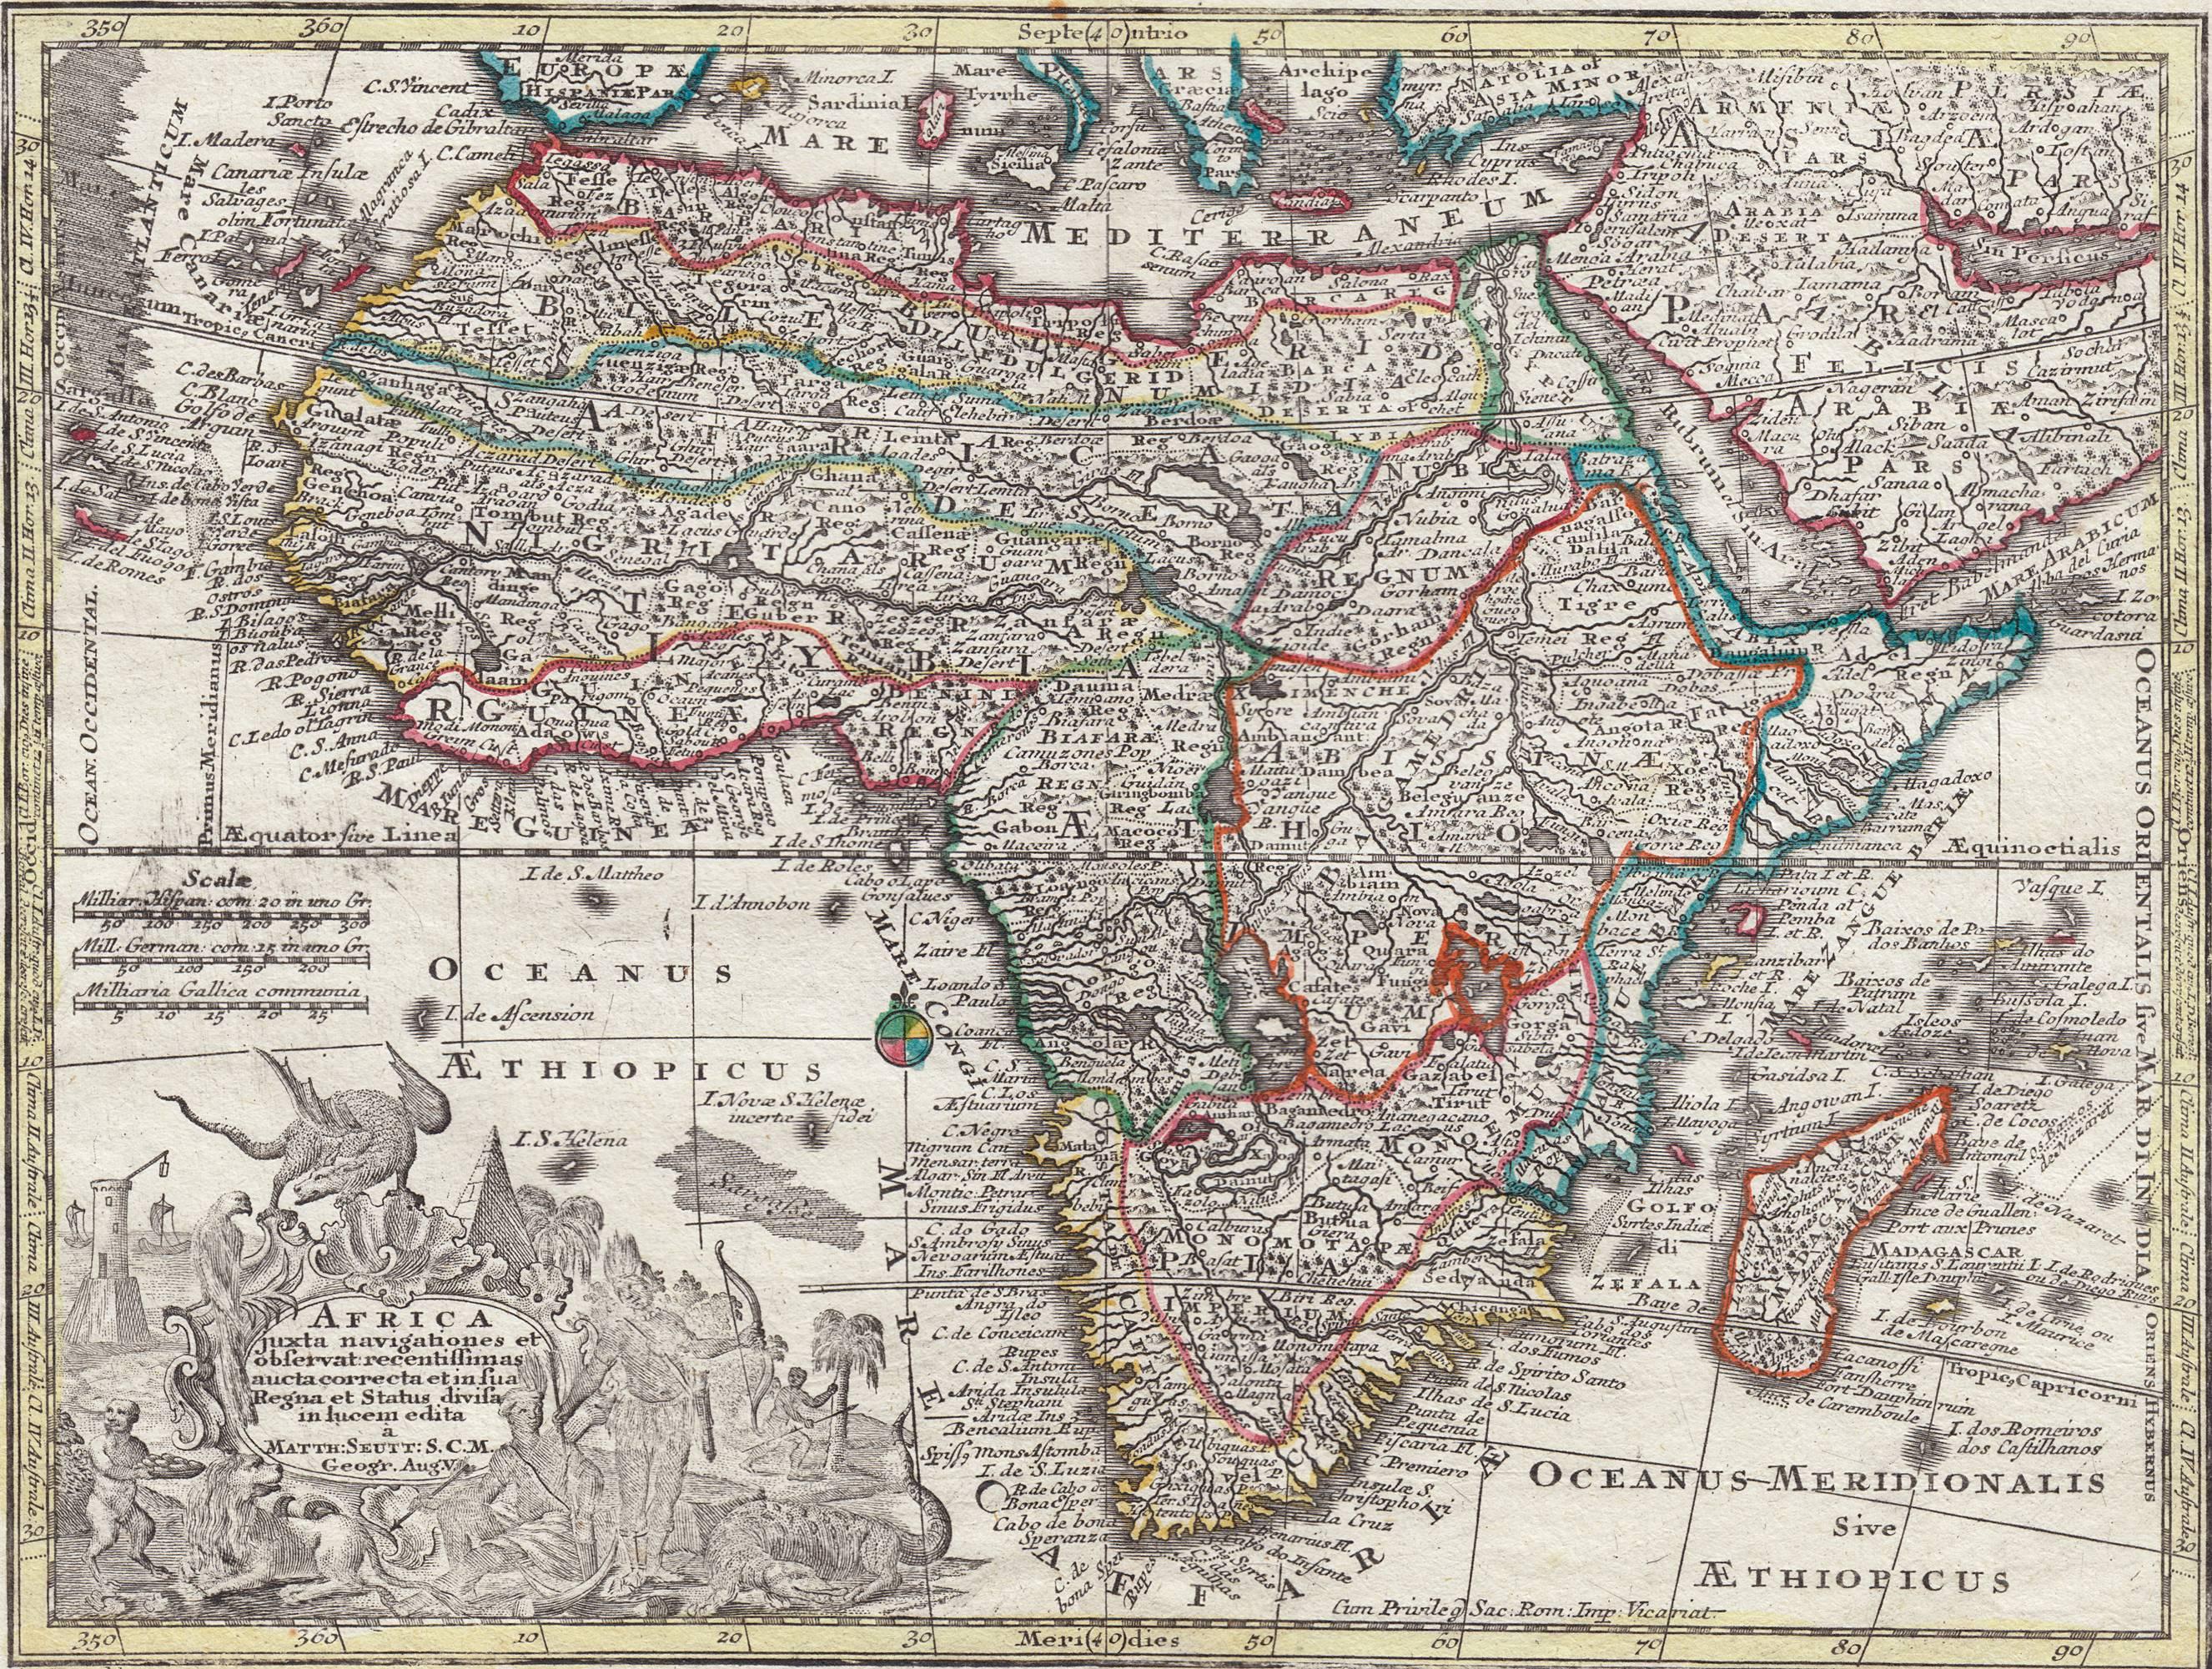 Seutter, Matthew. 
Africa.
From Atlas minor praecipua Terrarum Imperia...
Augsburg, circa 1744. 
Original engraving with old hand-coloring.
Image size: 7 5/8 x 10 1/8 inches.